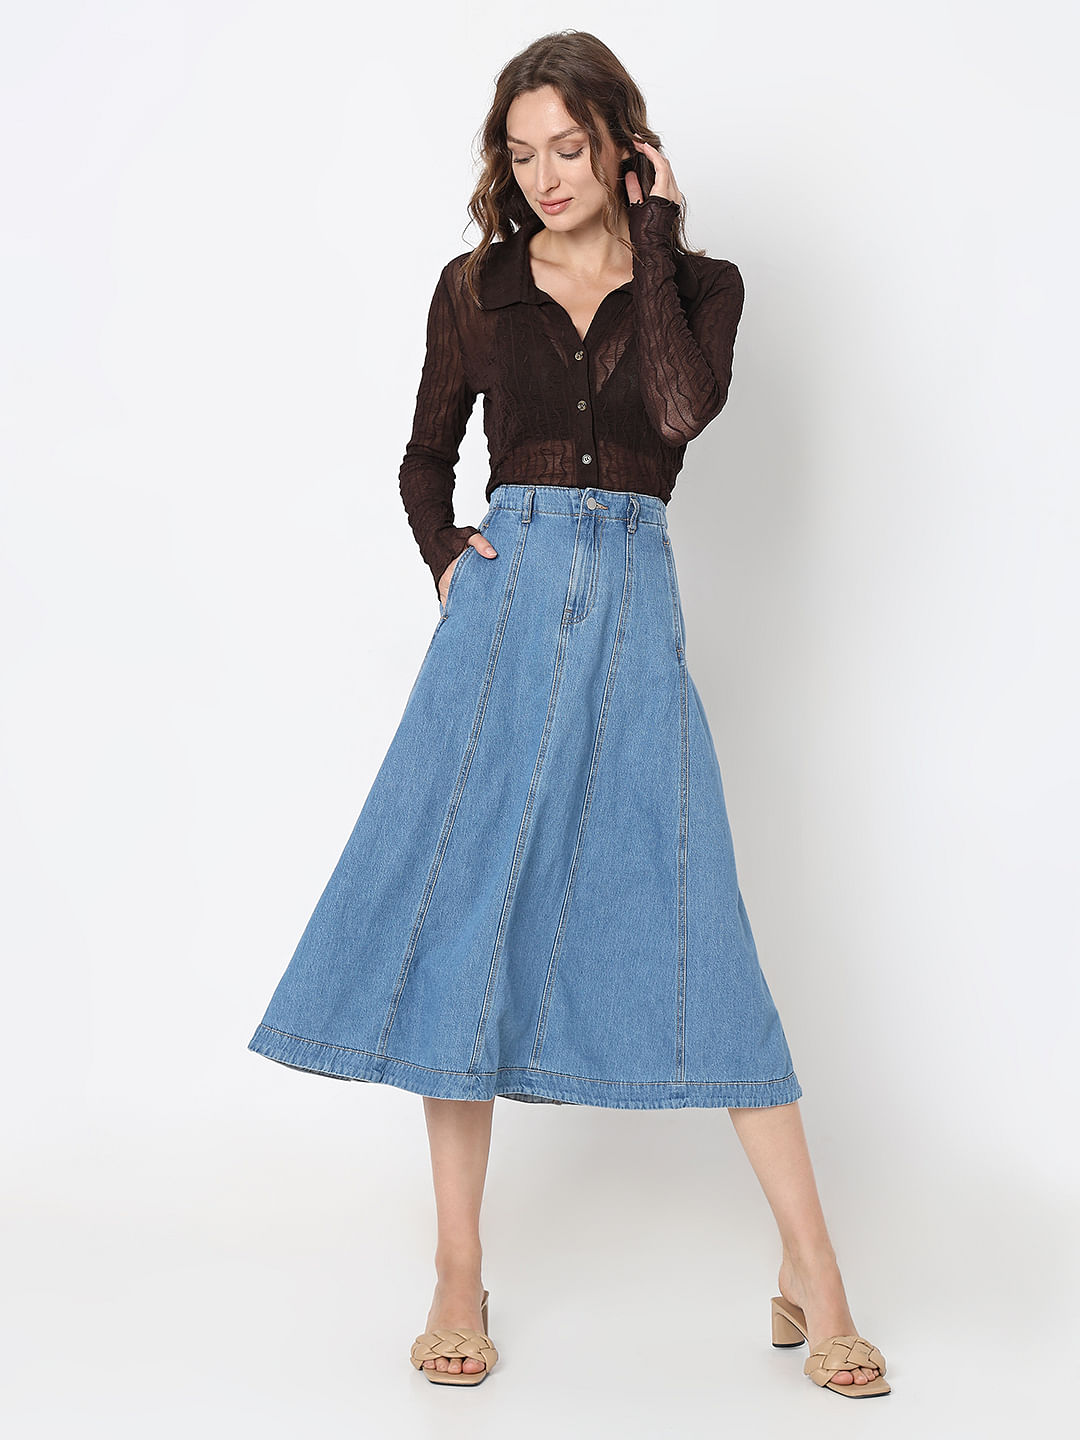 11 Denim Maxi Skirts Filled With Main Character Energy